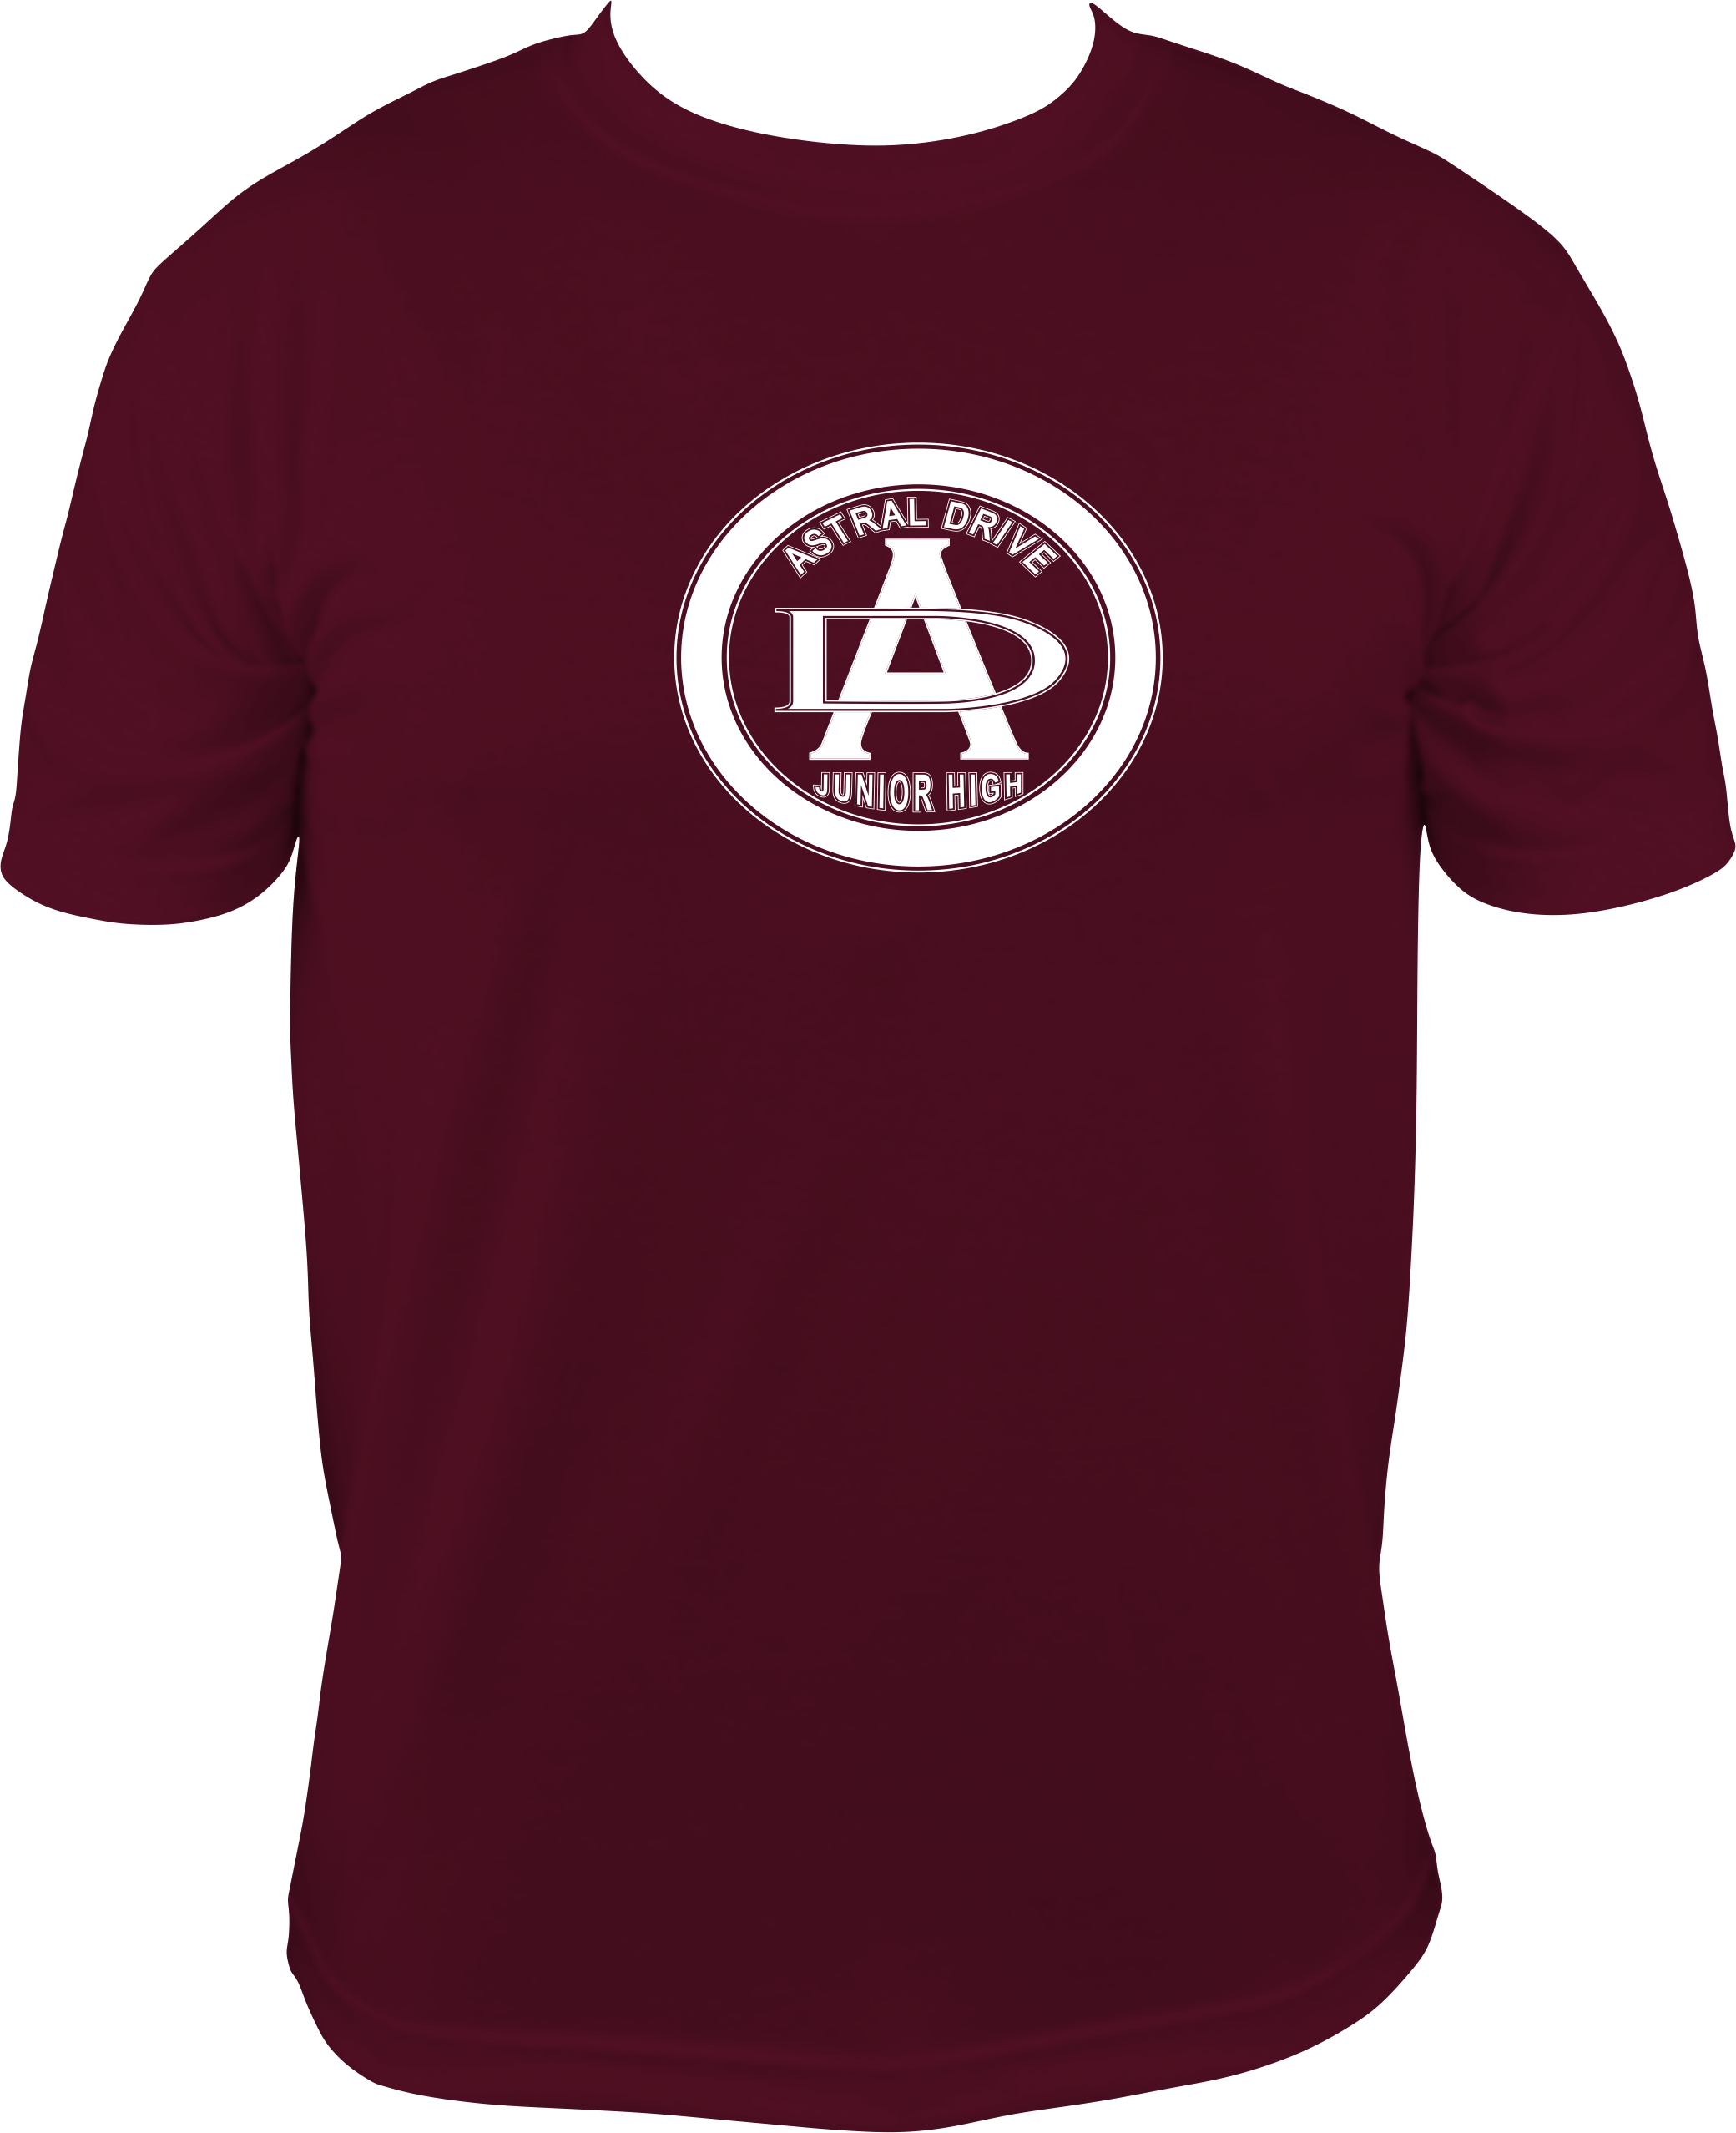 Maroon and White Logo - Gildan T Shirt (Maroon) Astral Drive Logo Across Front (White